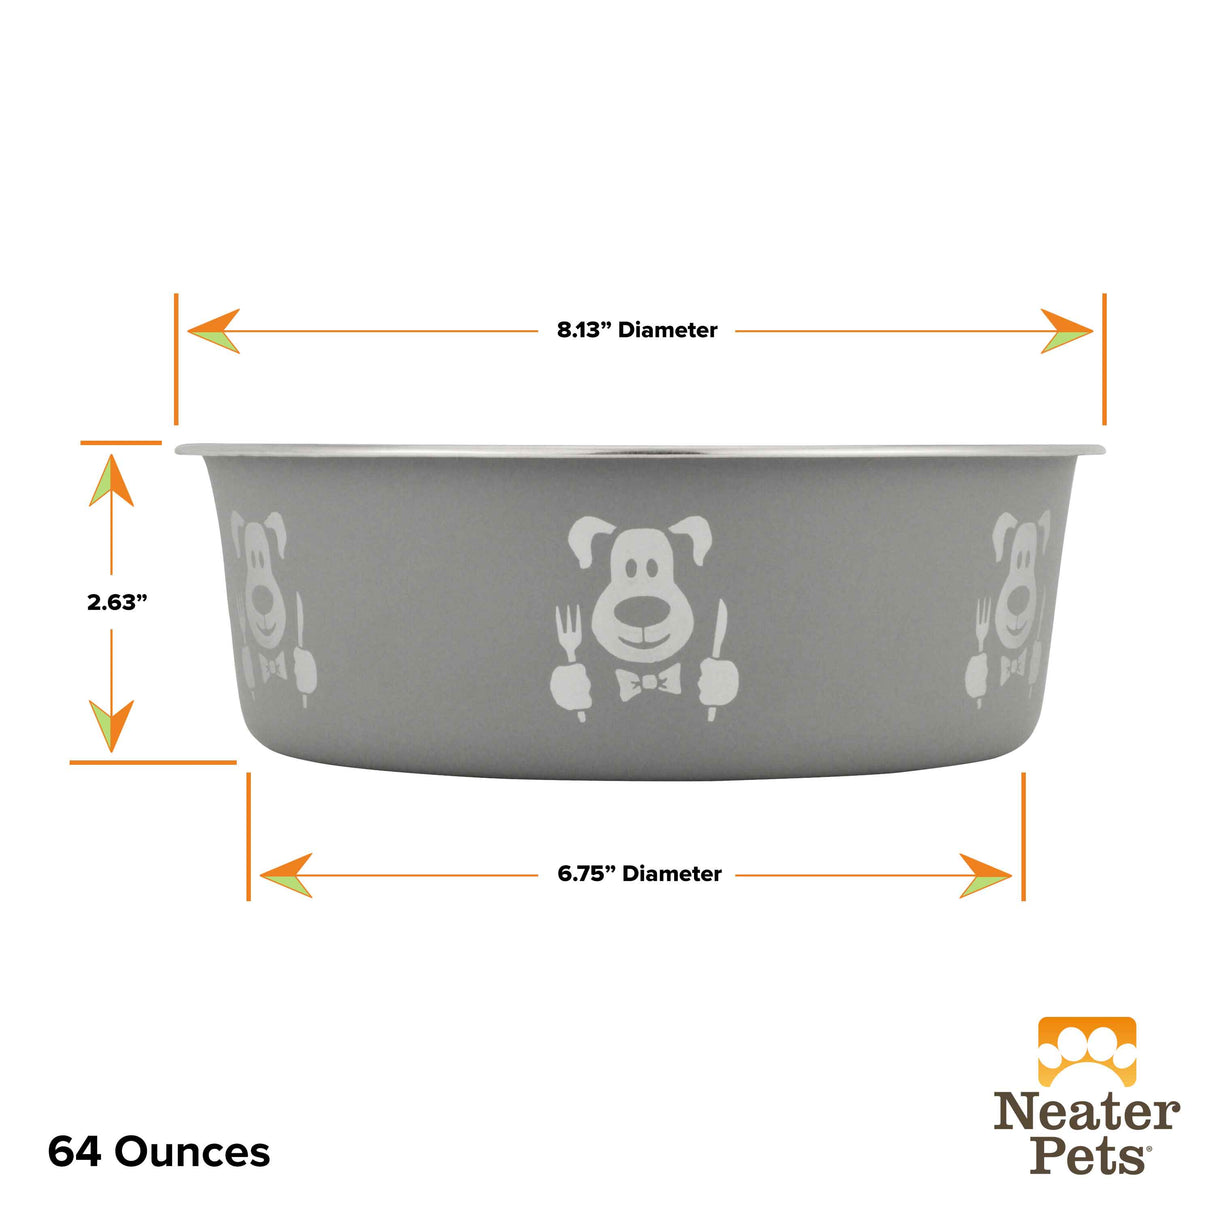 Hungry dog large bowl dimensions